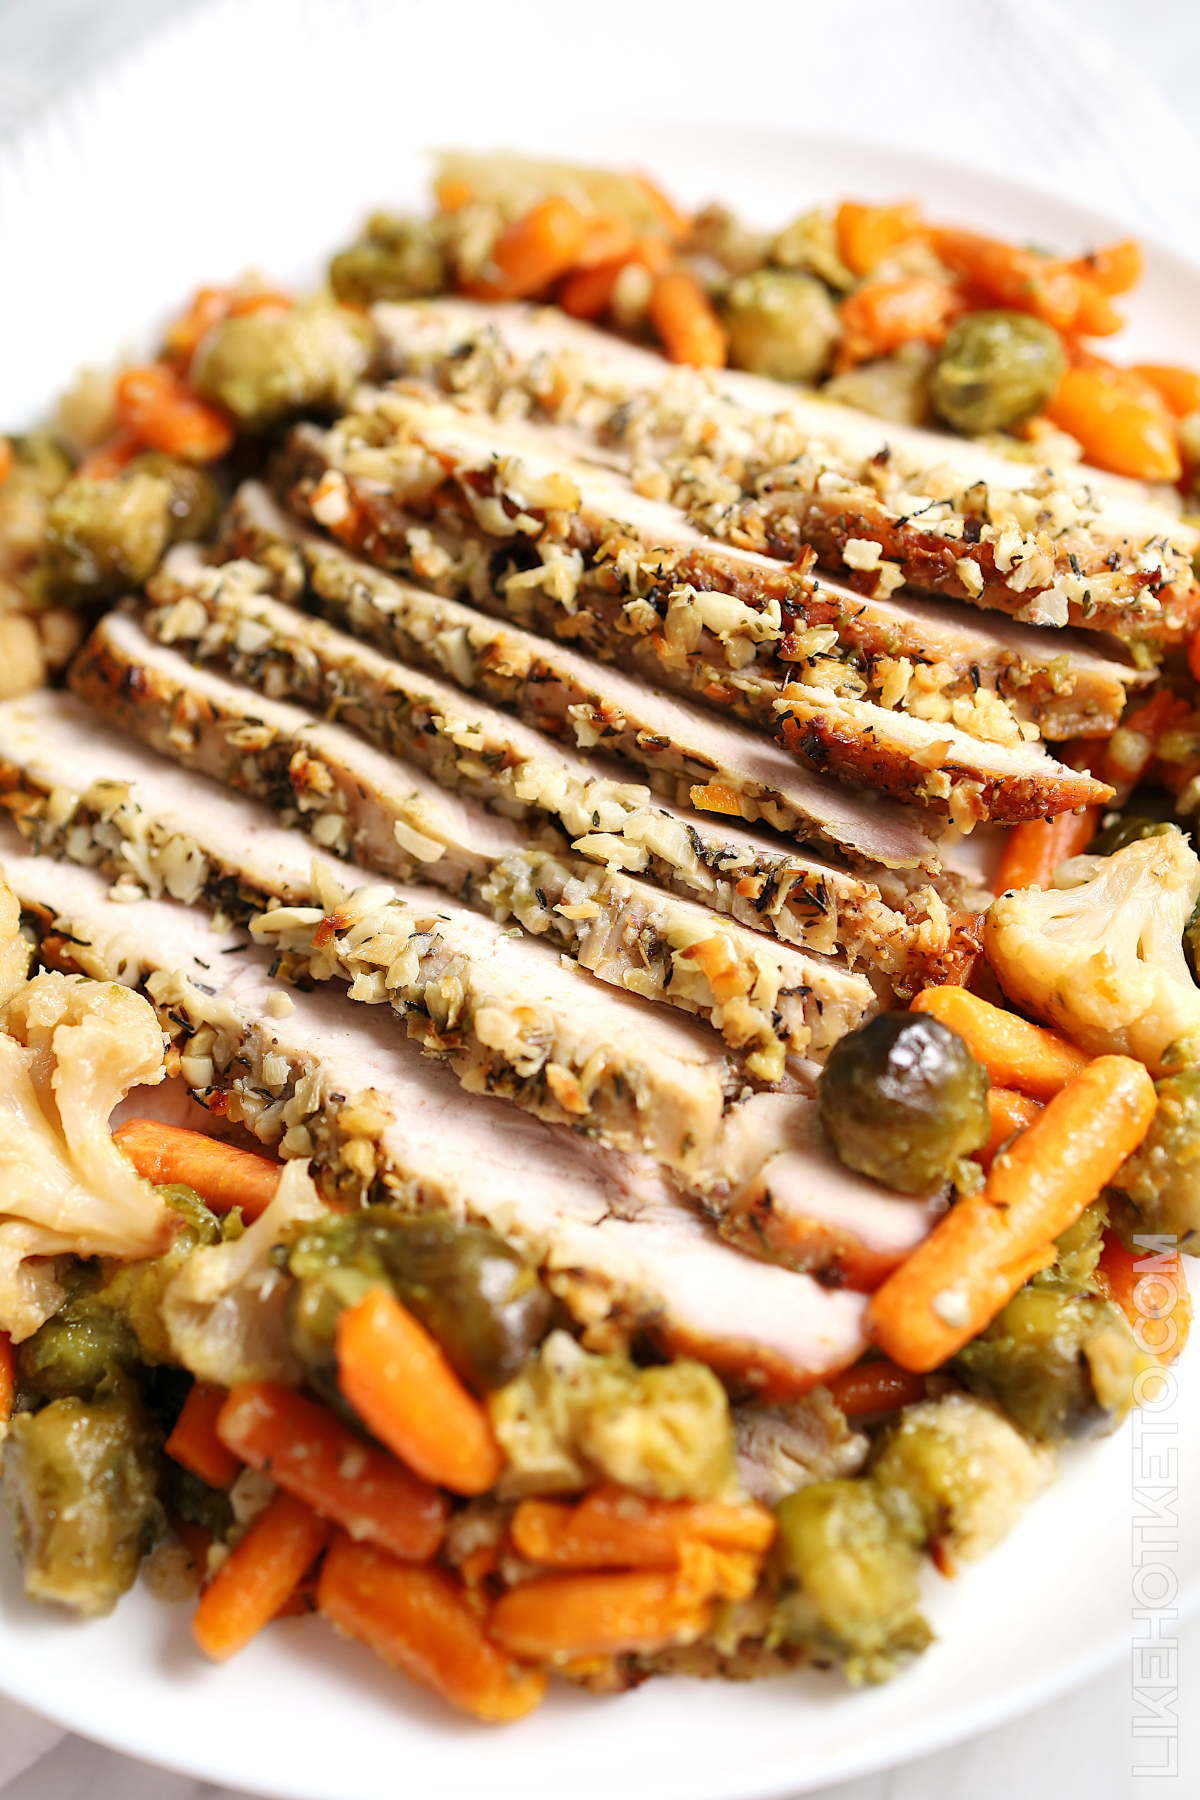 A large serving plate with roasted garlic butter turkey breast surrounded with baby carrots, Brussel sprouts and cauliflower.